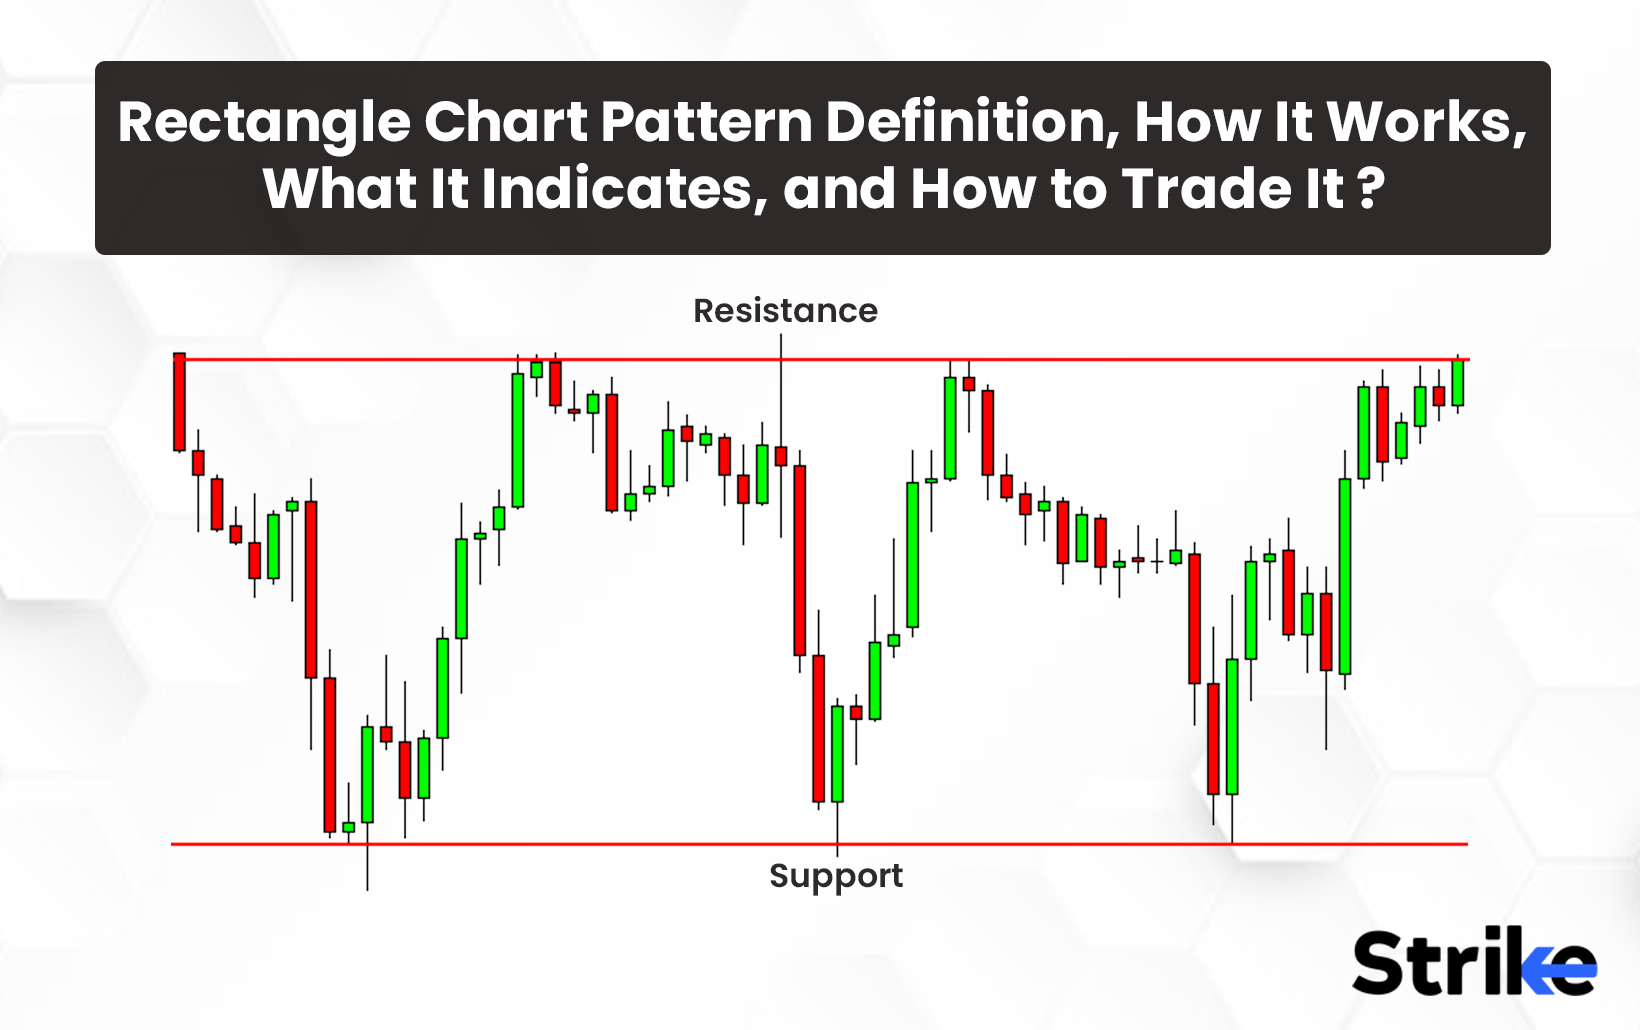 Rectangle Chart Pattern: Definition, How It Works, What It Indicates, and How to Trade It?